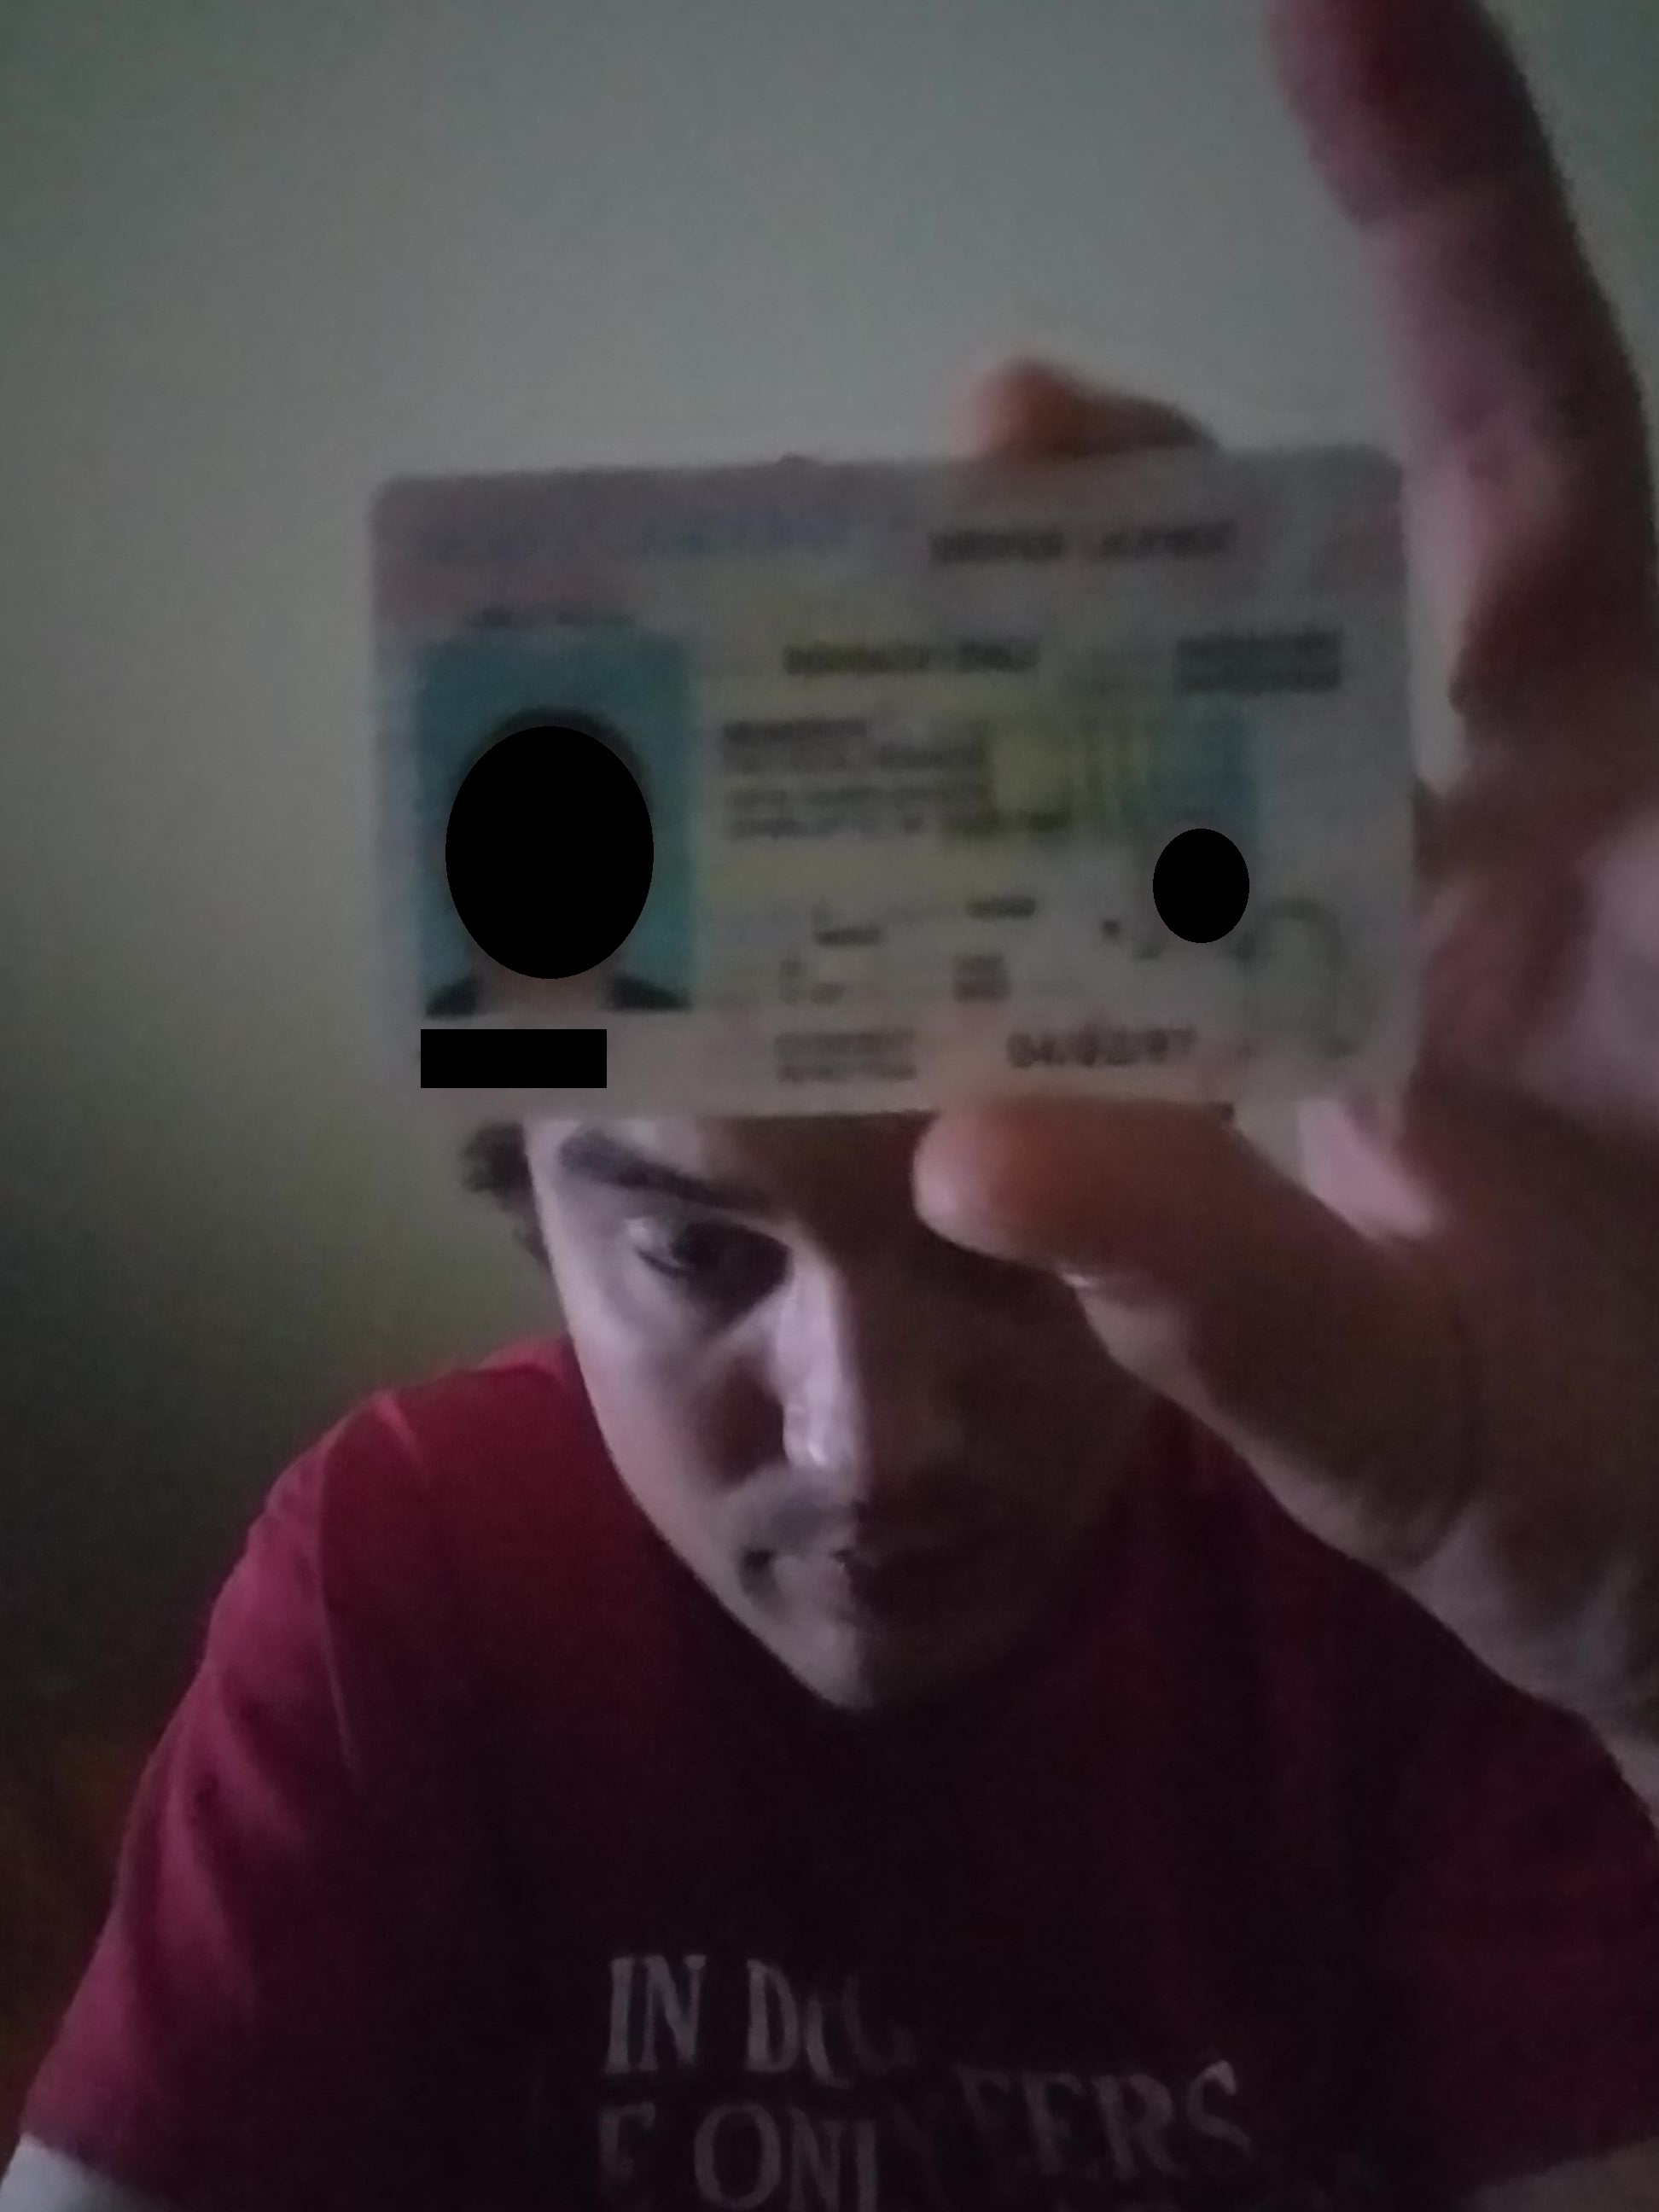 picture of Patrick murphy holding ID when buying